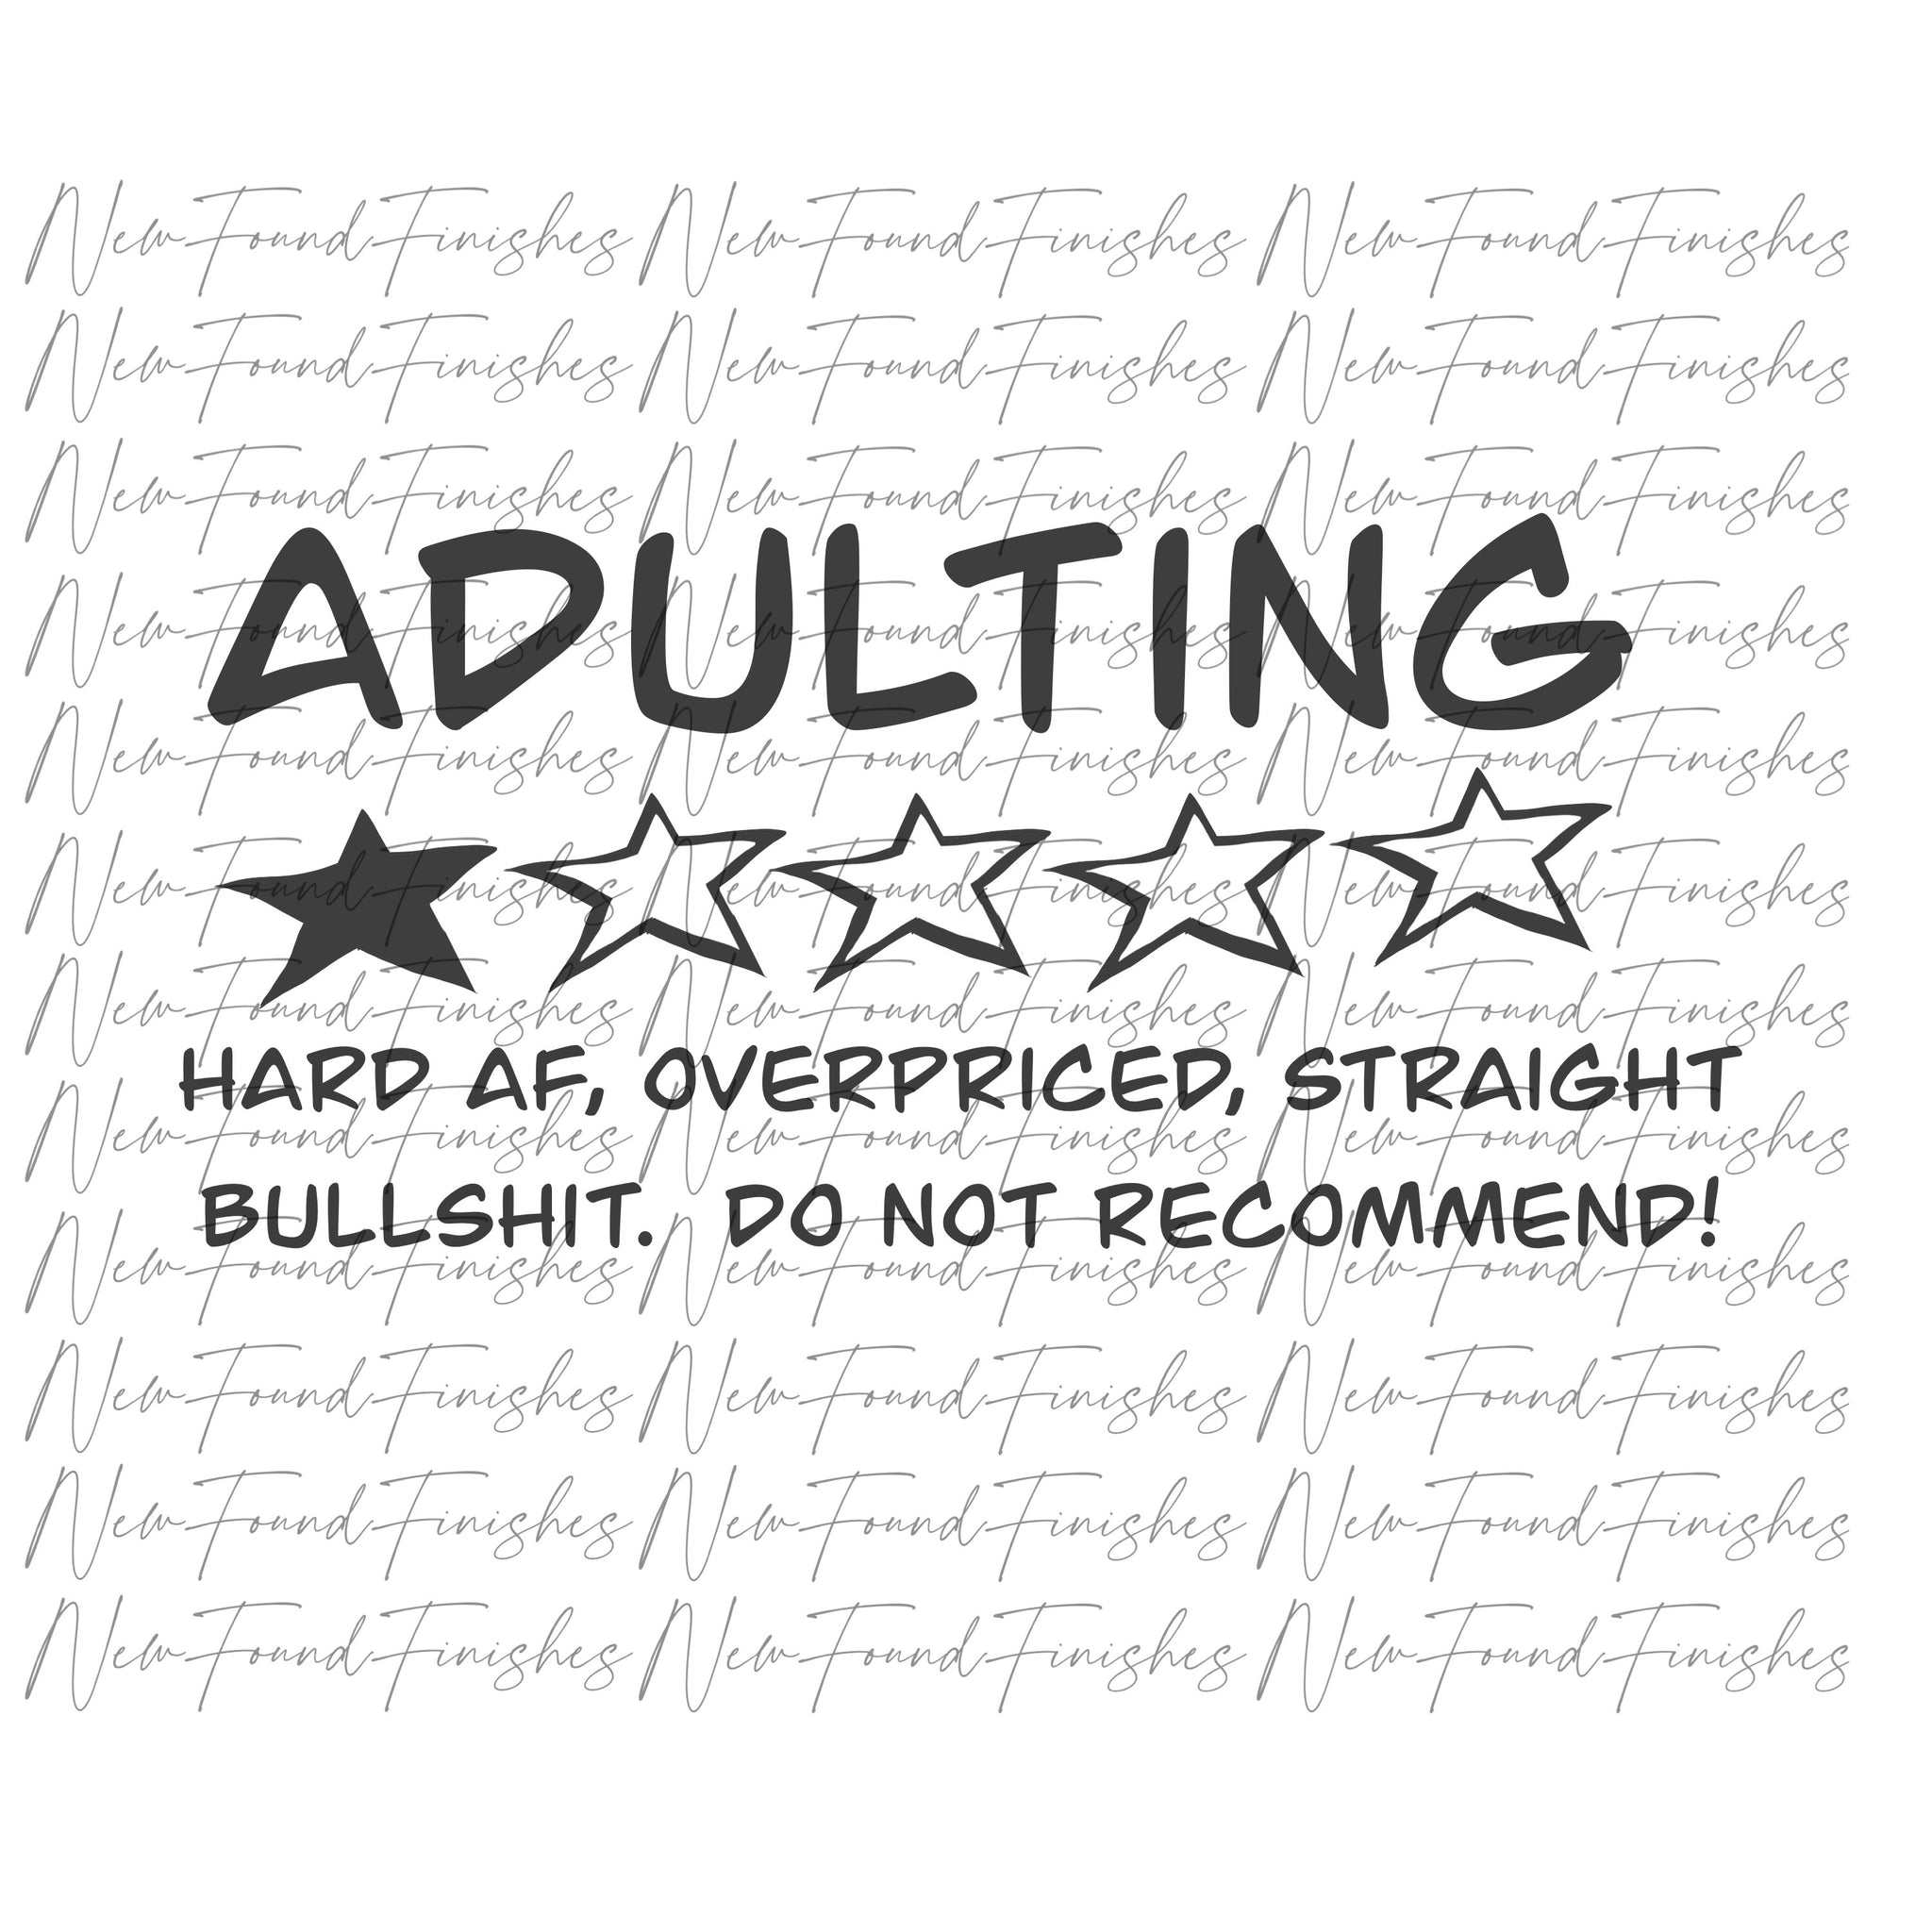 Adulting rated